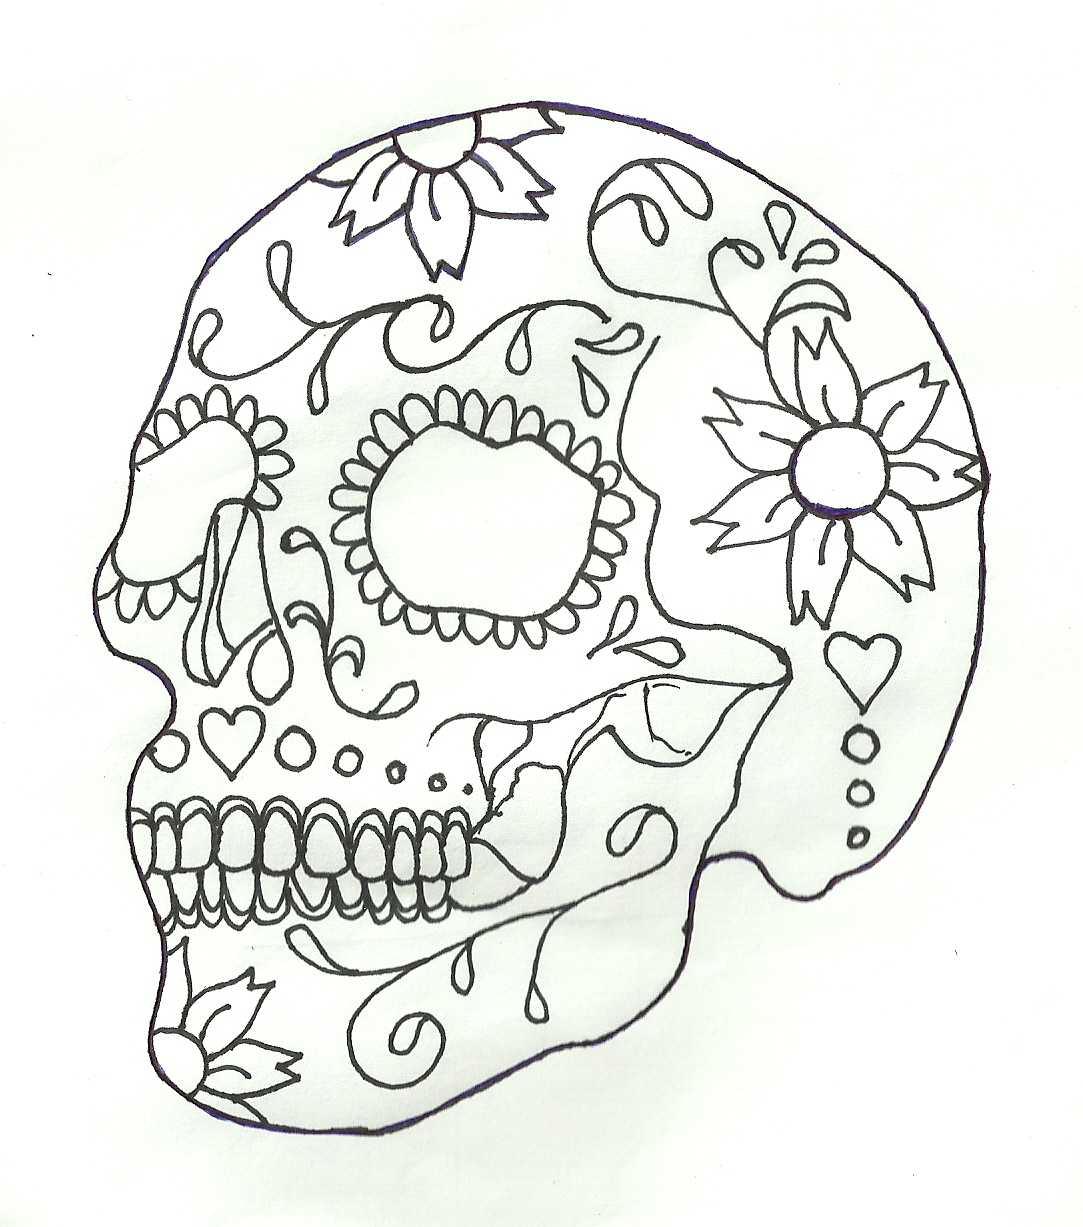 The Best Free Sugar Skull Drawing Images. Download From With Blank Sugar Skull Template